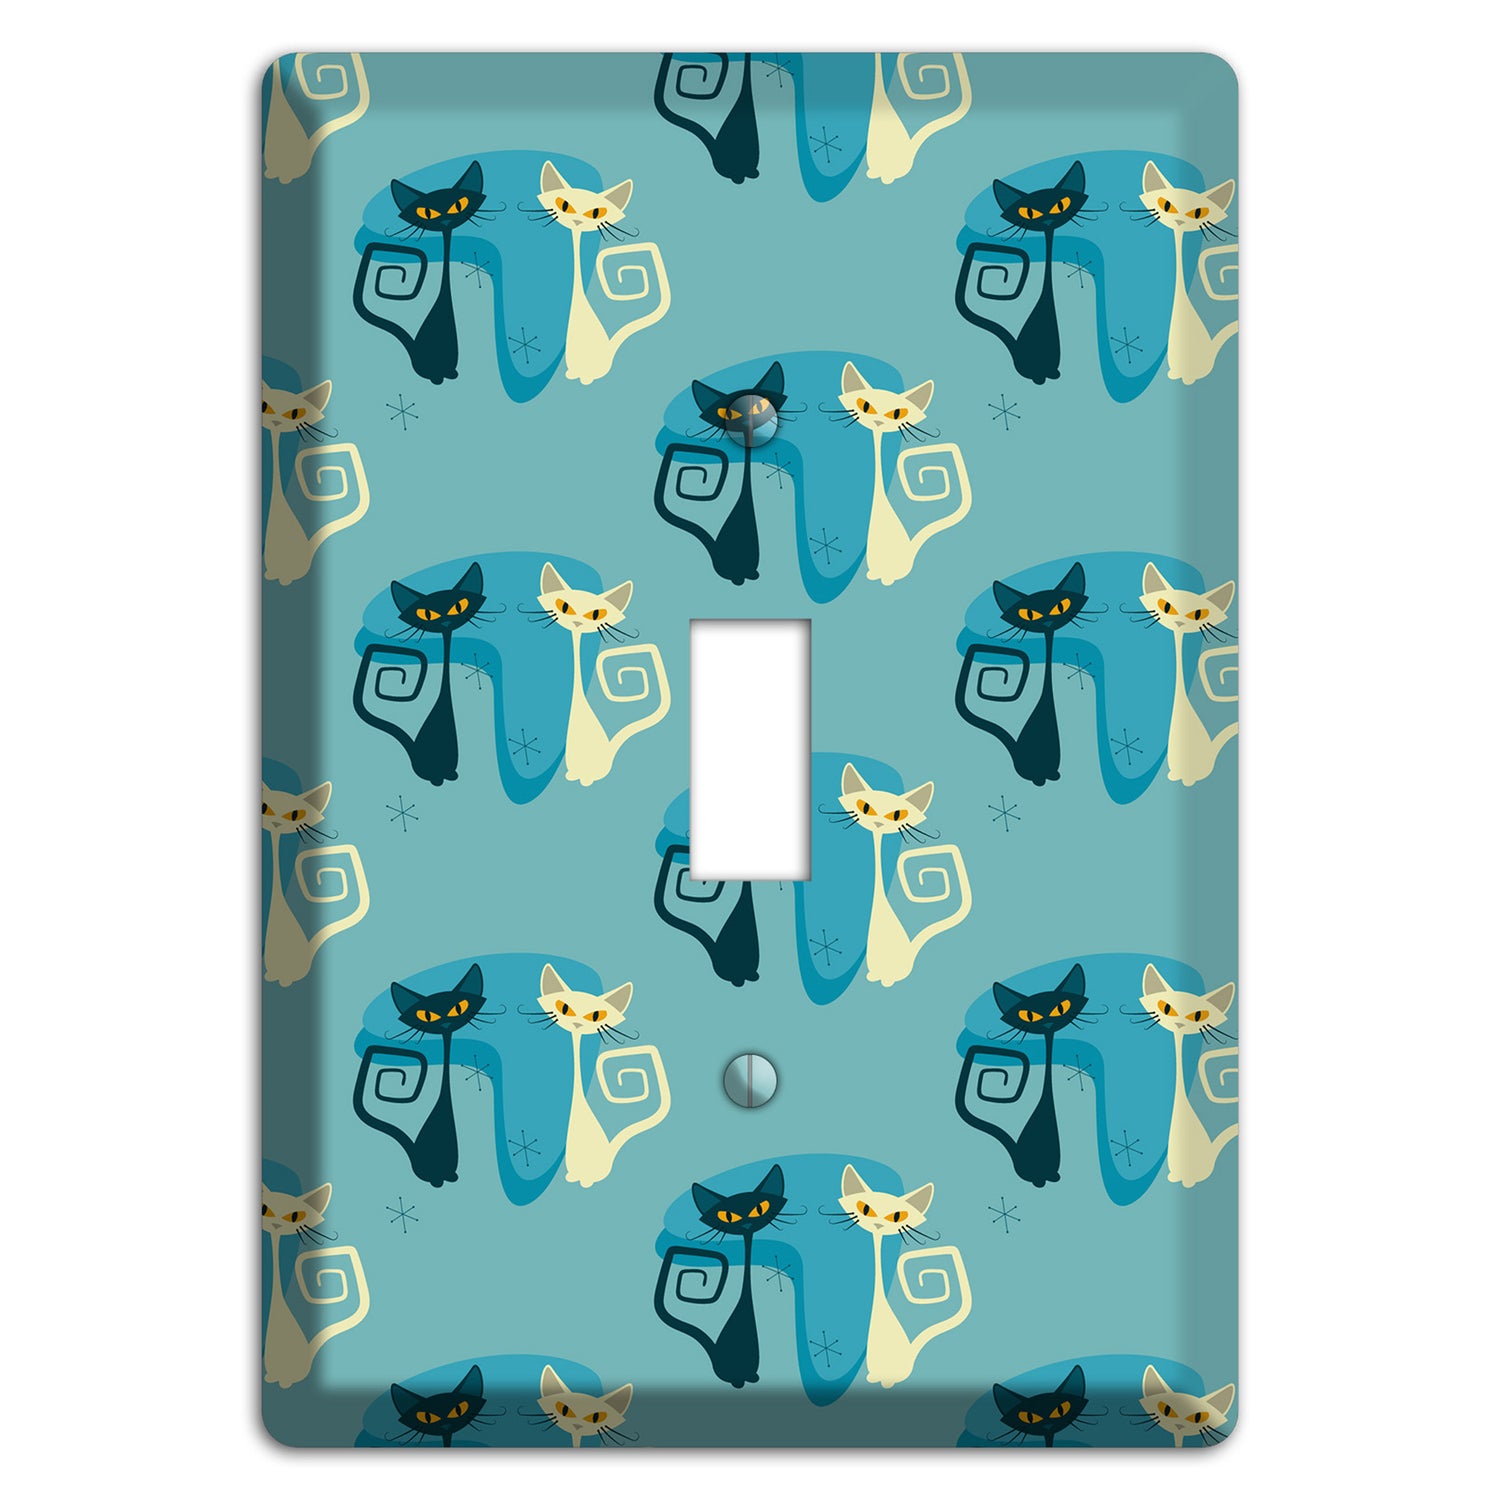 Adoable Kitties Cover Plates